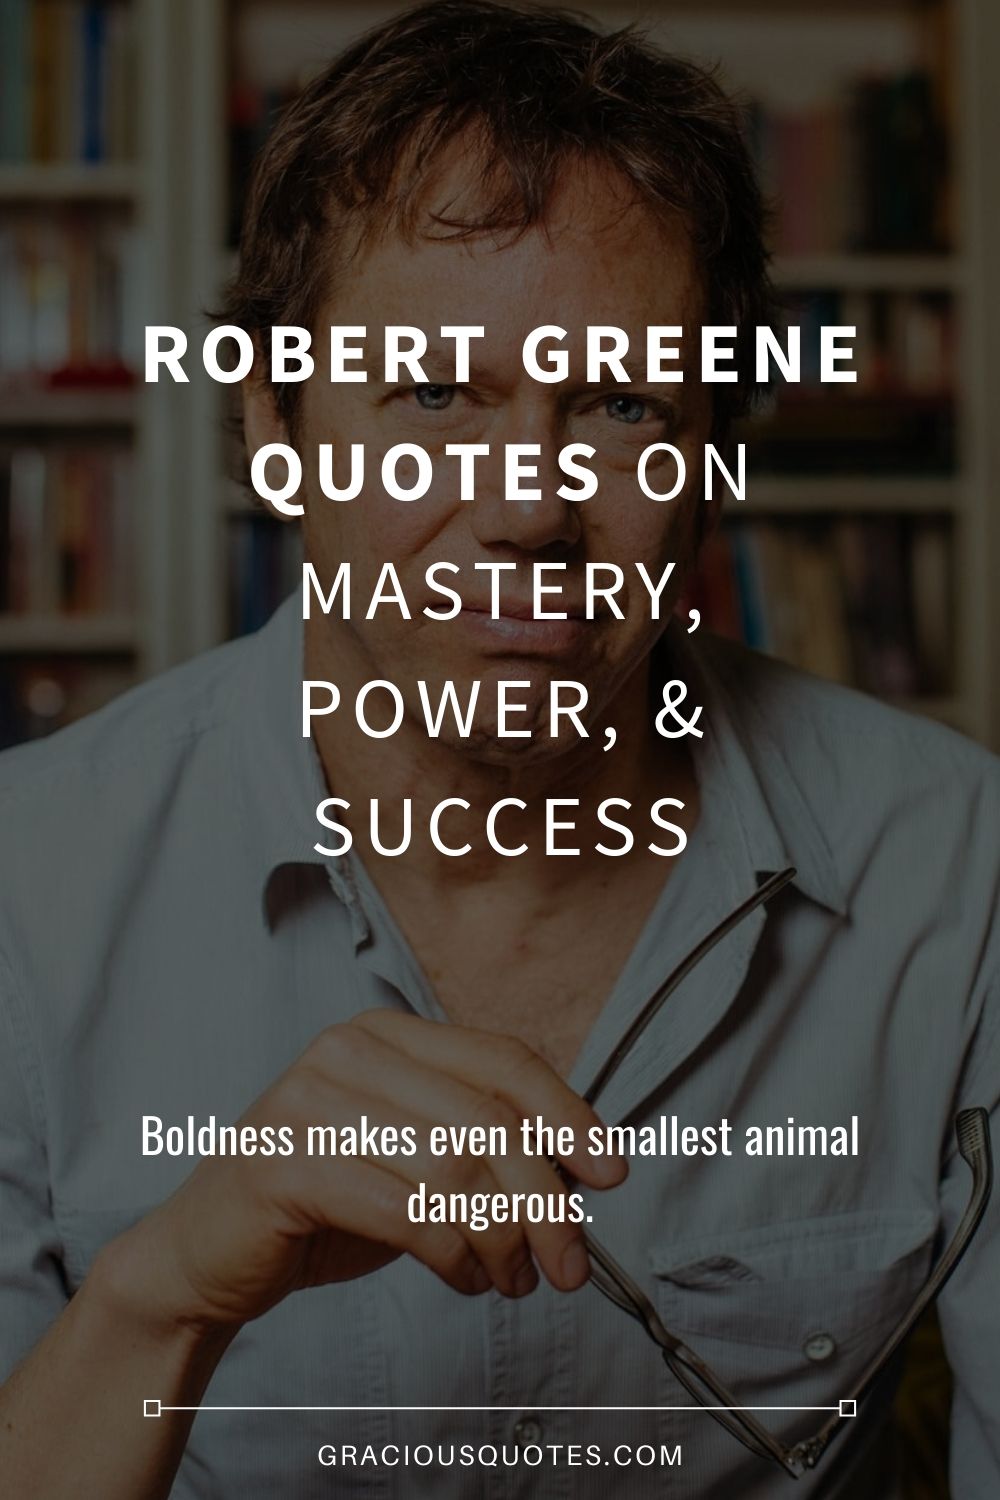 Robert-Greene-Quotes-on-Mastery-Power-Success-Gracious-Quotes